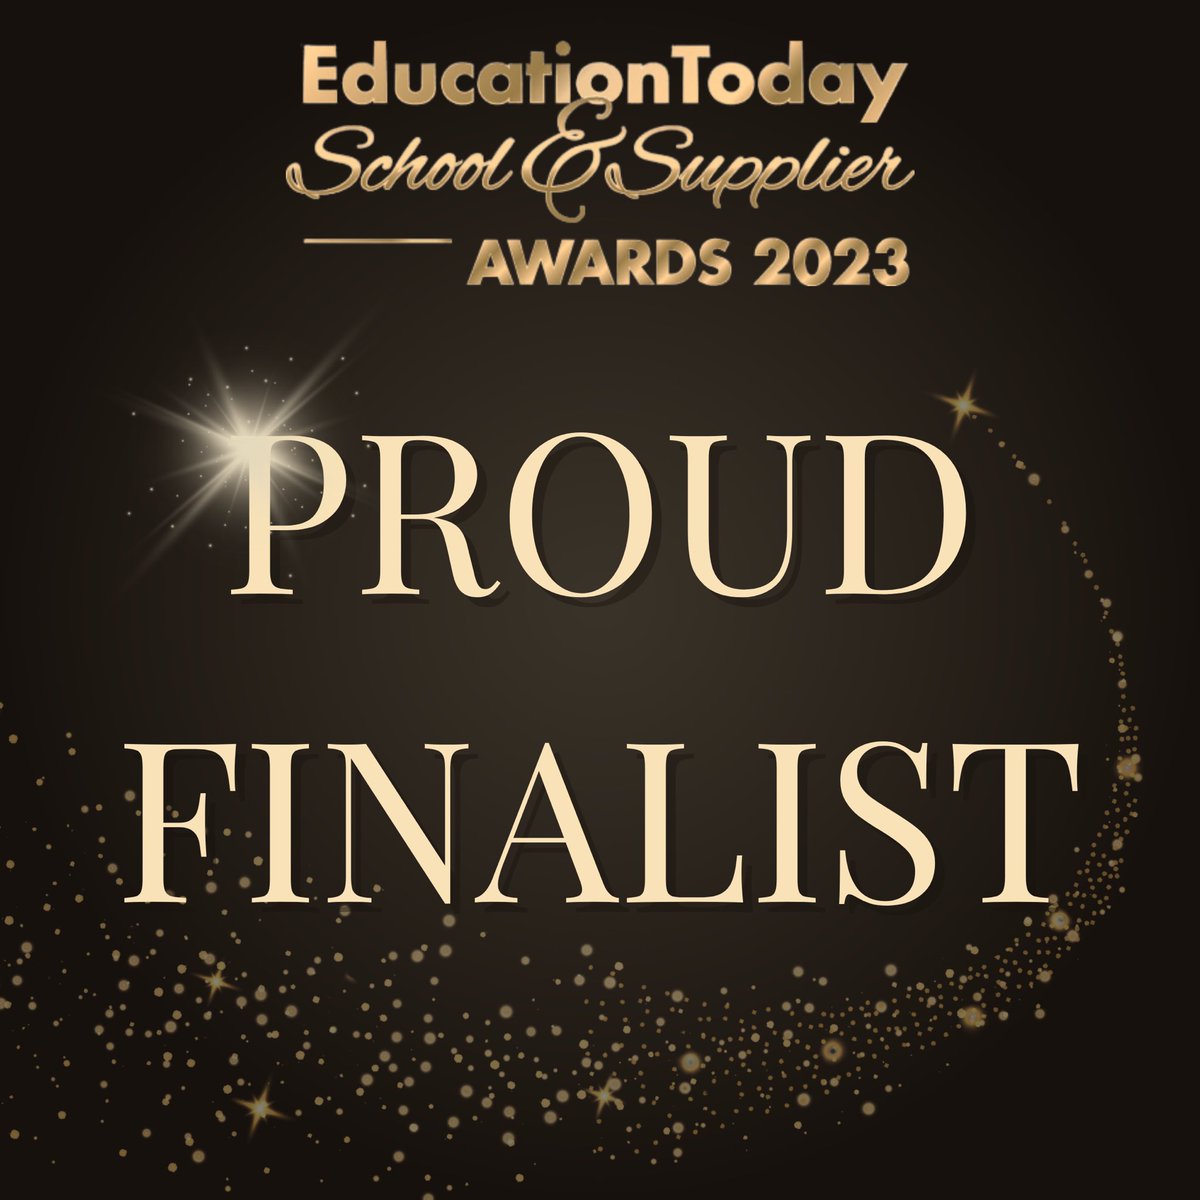 For the second consecutive year Langtree School has been shortlisted for the Secondary School of the Year award. Thank you to whoever has nominated us and congratulations to all our students, staff, governors and parents for creating such a wonderful school.